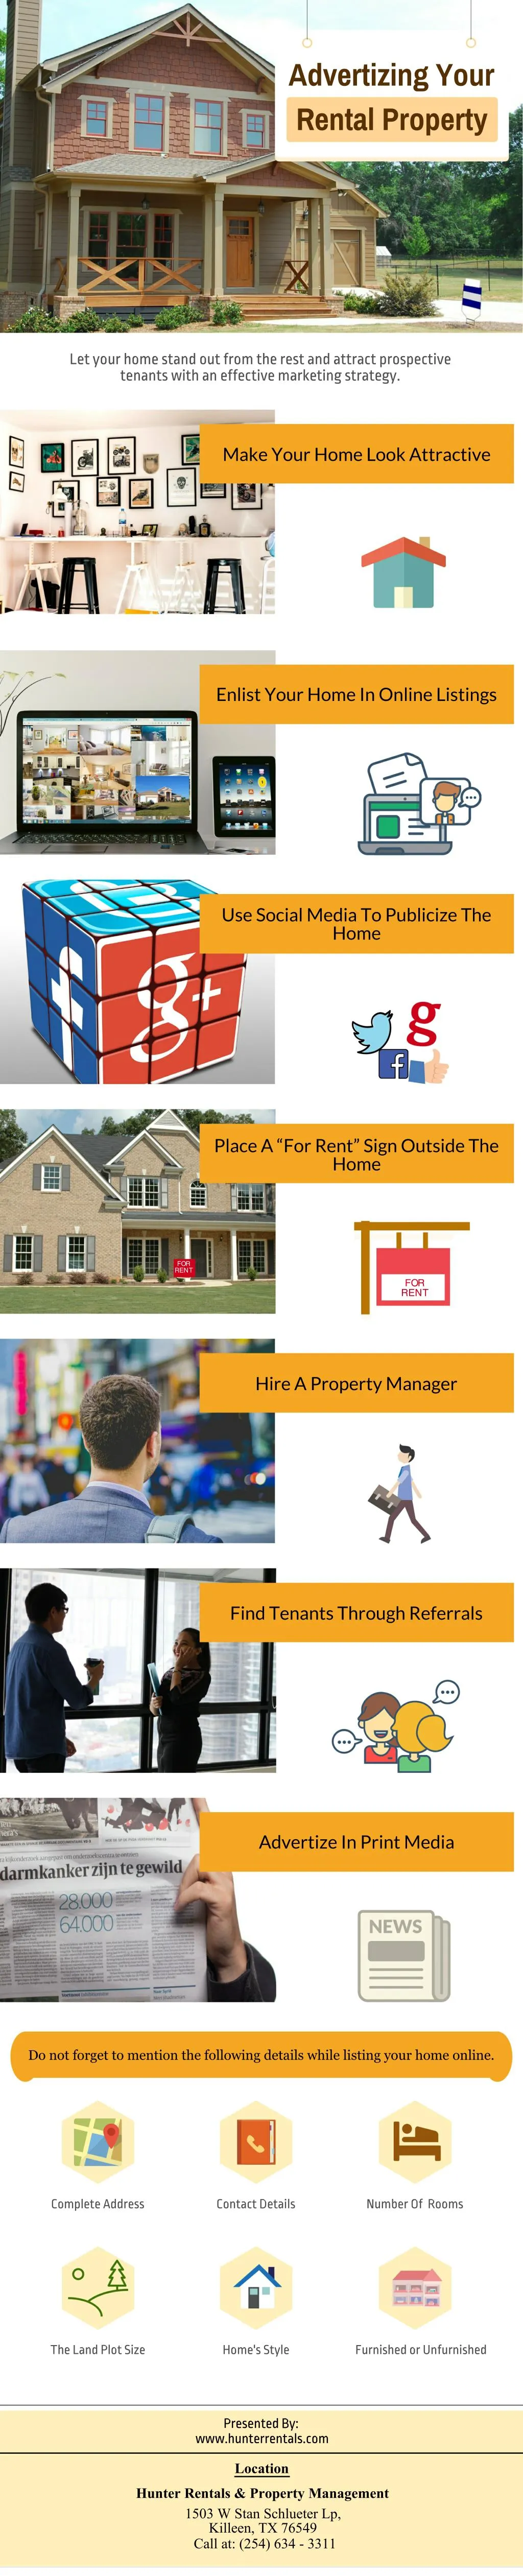 advertizing your rental property